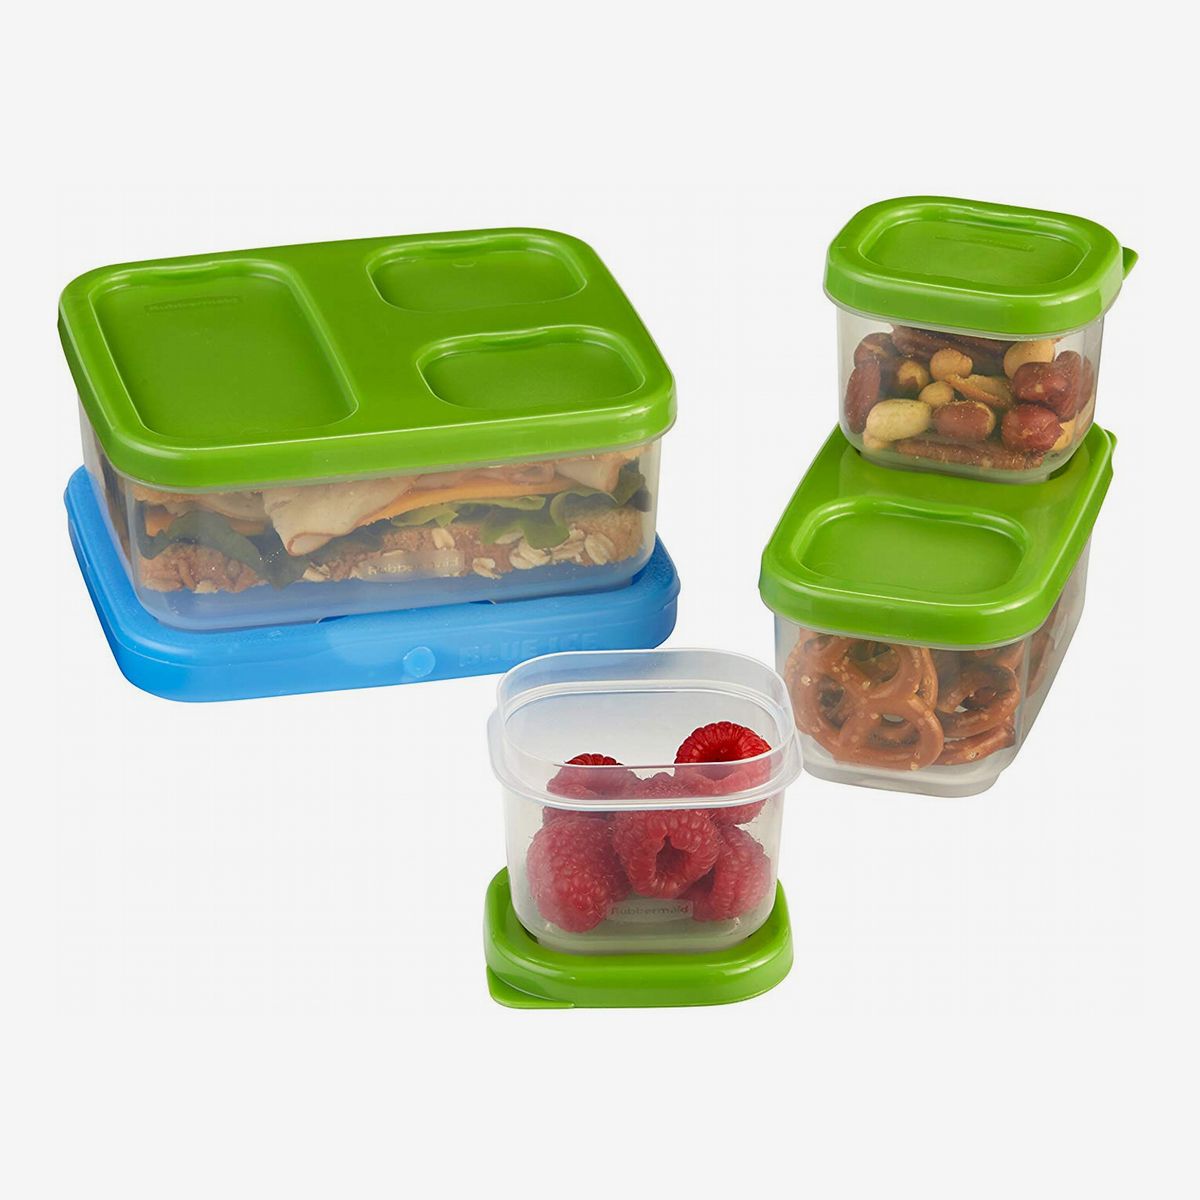 12 Pc Plastic Containers Storage Boxes /& Lids Stack /& Store Food Saver Lunch Tub